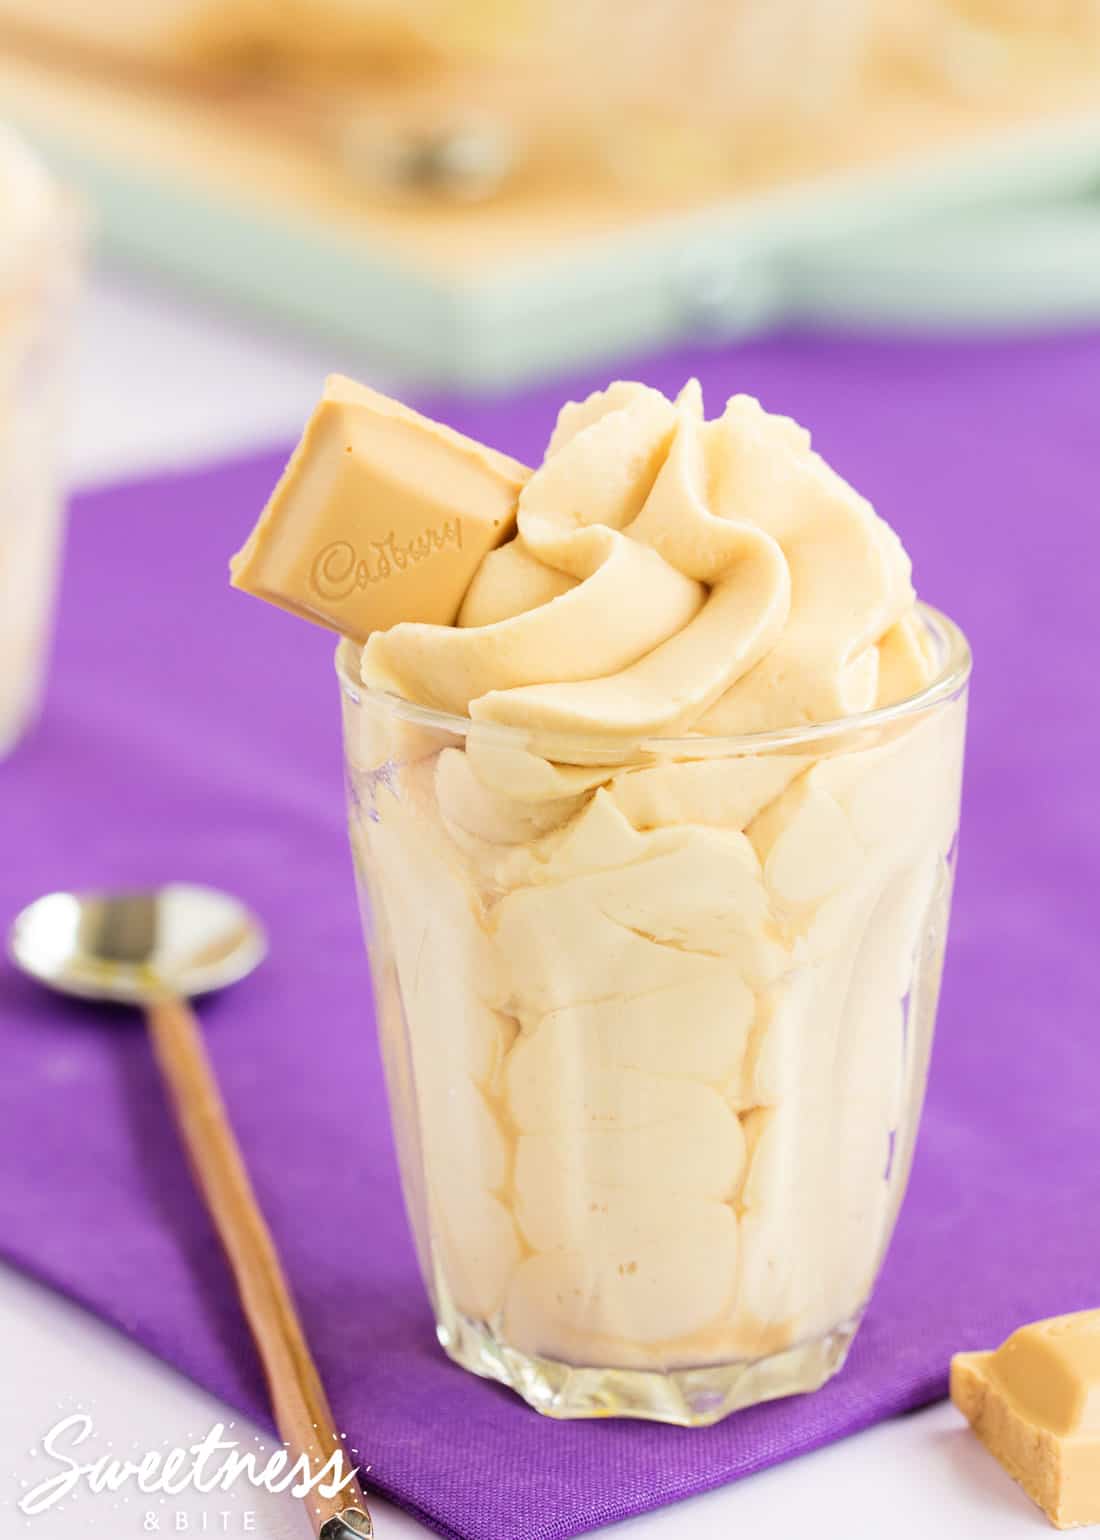 Caramilk Mousse, piped in a swirl into a small glass with a square of Caramilk chocolate on top.